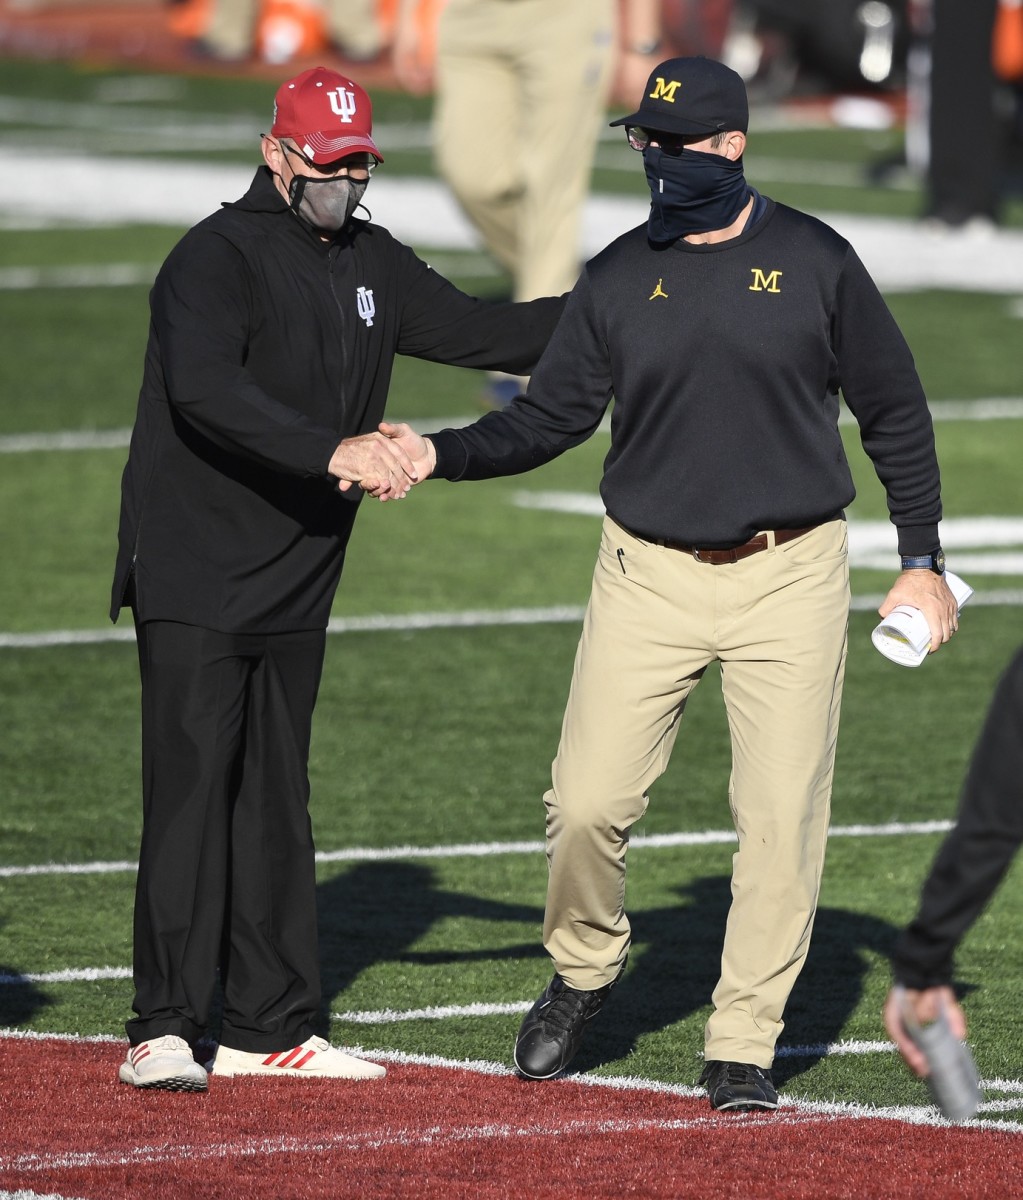 Indiana coach Tom Allen shakes the hand of Michigan coach Jim Harbaugh after the game. Indiana  defeated Michigan Wolverines, 38-21. (Marc Lebryk-USA TODAY Sports)